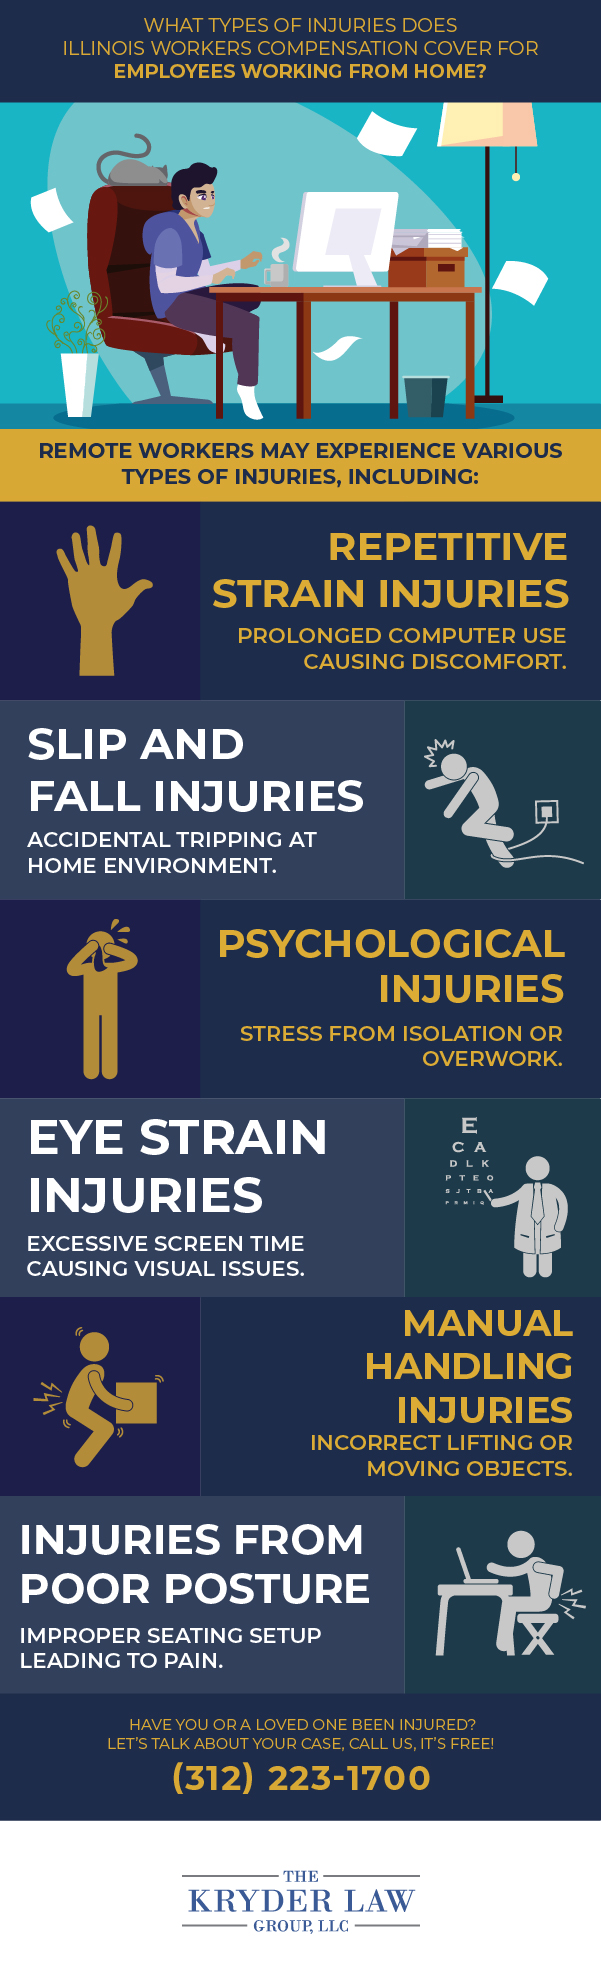 What Types of Injuries Does Illinois Workers' Compensation Cover for Employees Working from Home?